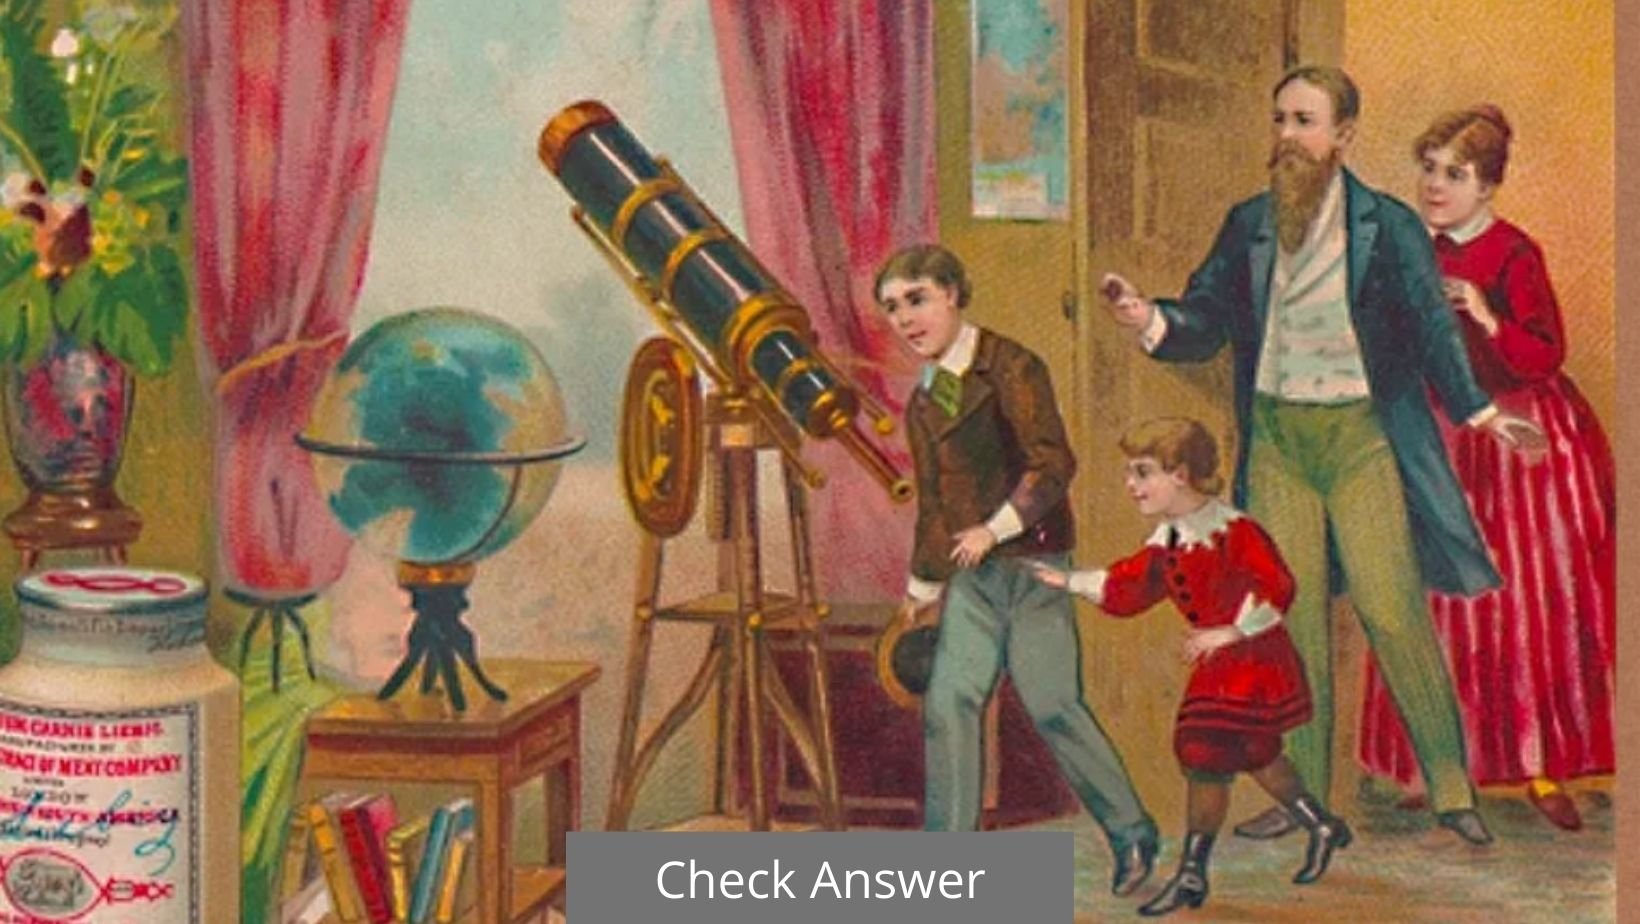 small joys thumbnail 1.jpg?resize=1200,630 - There Is An ASTRONOMER Hiding In This Vintage Ad, Can You Spot Him?